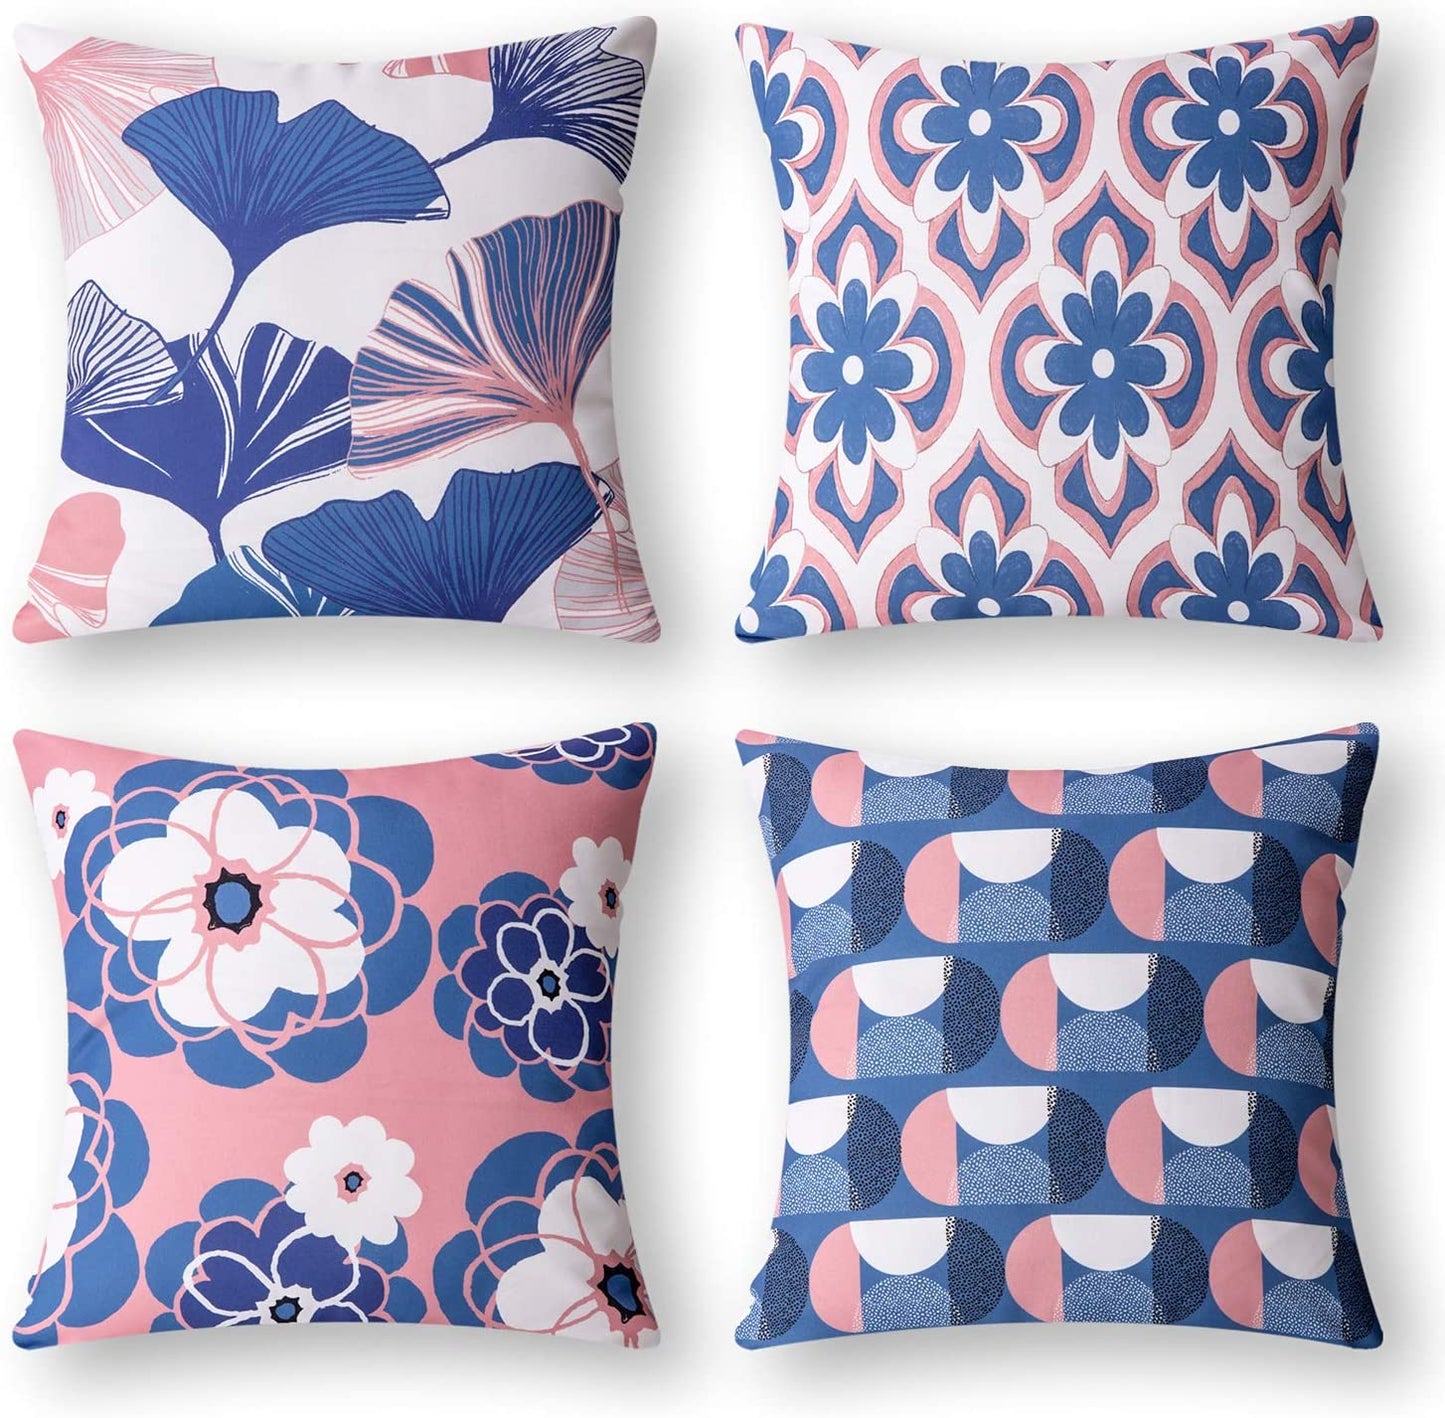 Set of 4 New Living Series Ginkgo Double Side Print Decorative Throw Pillow Case Cushion Cover